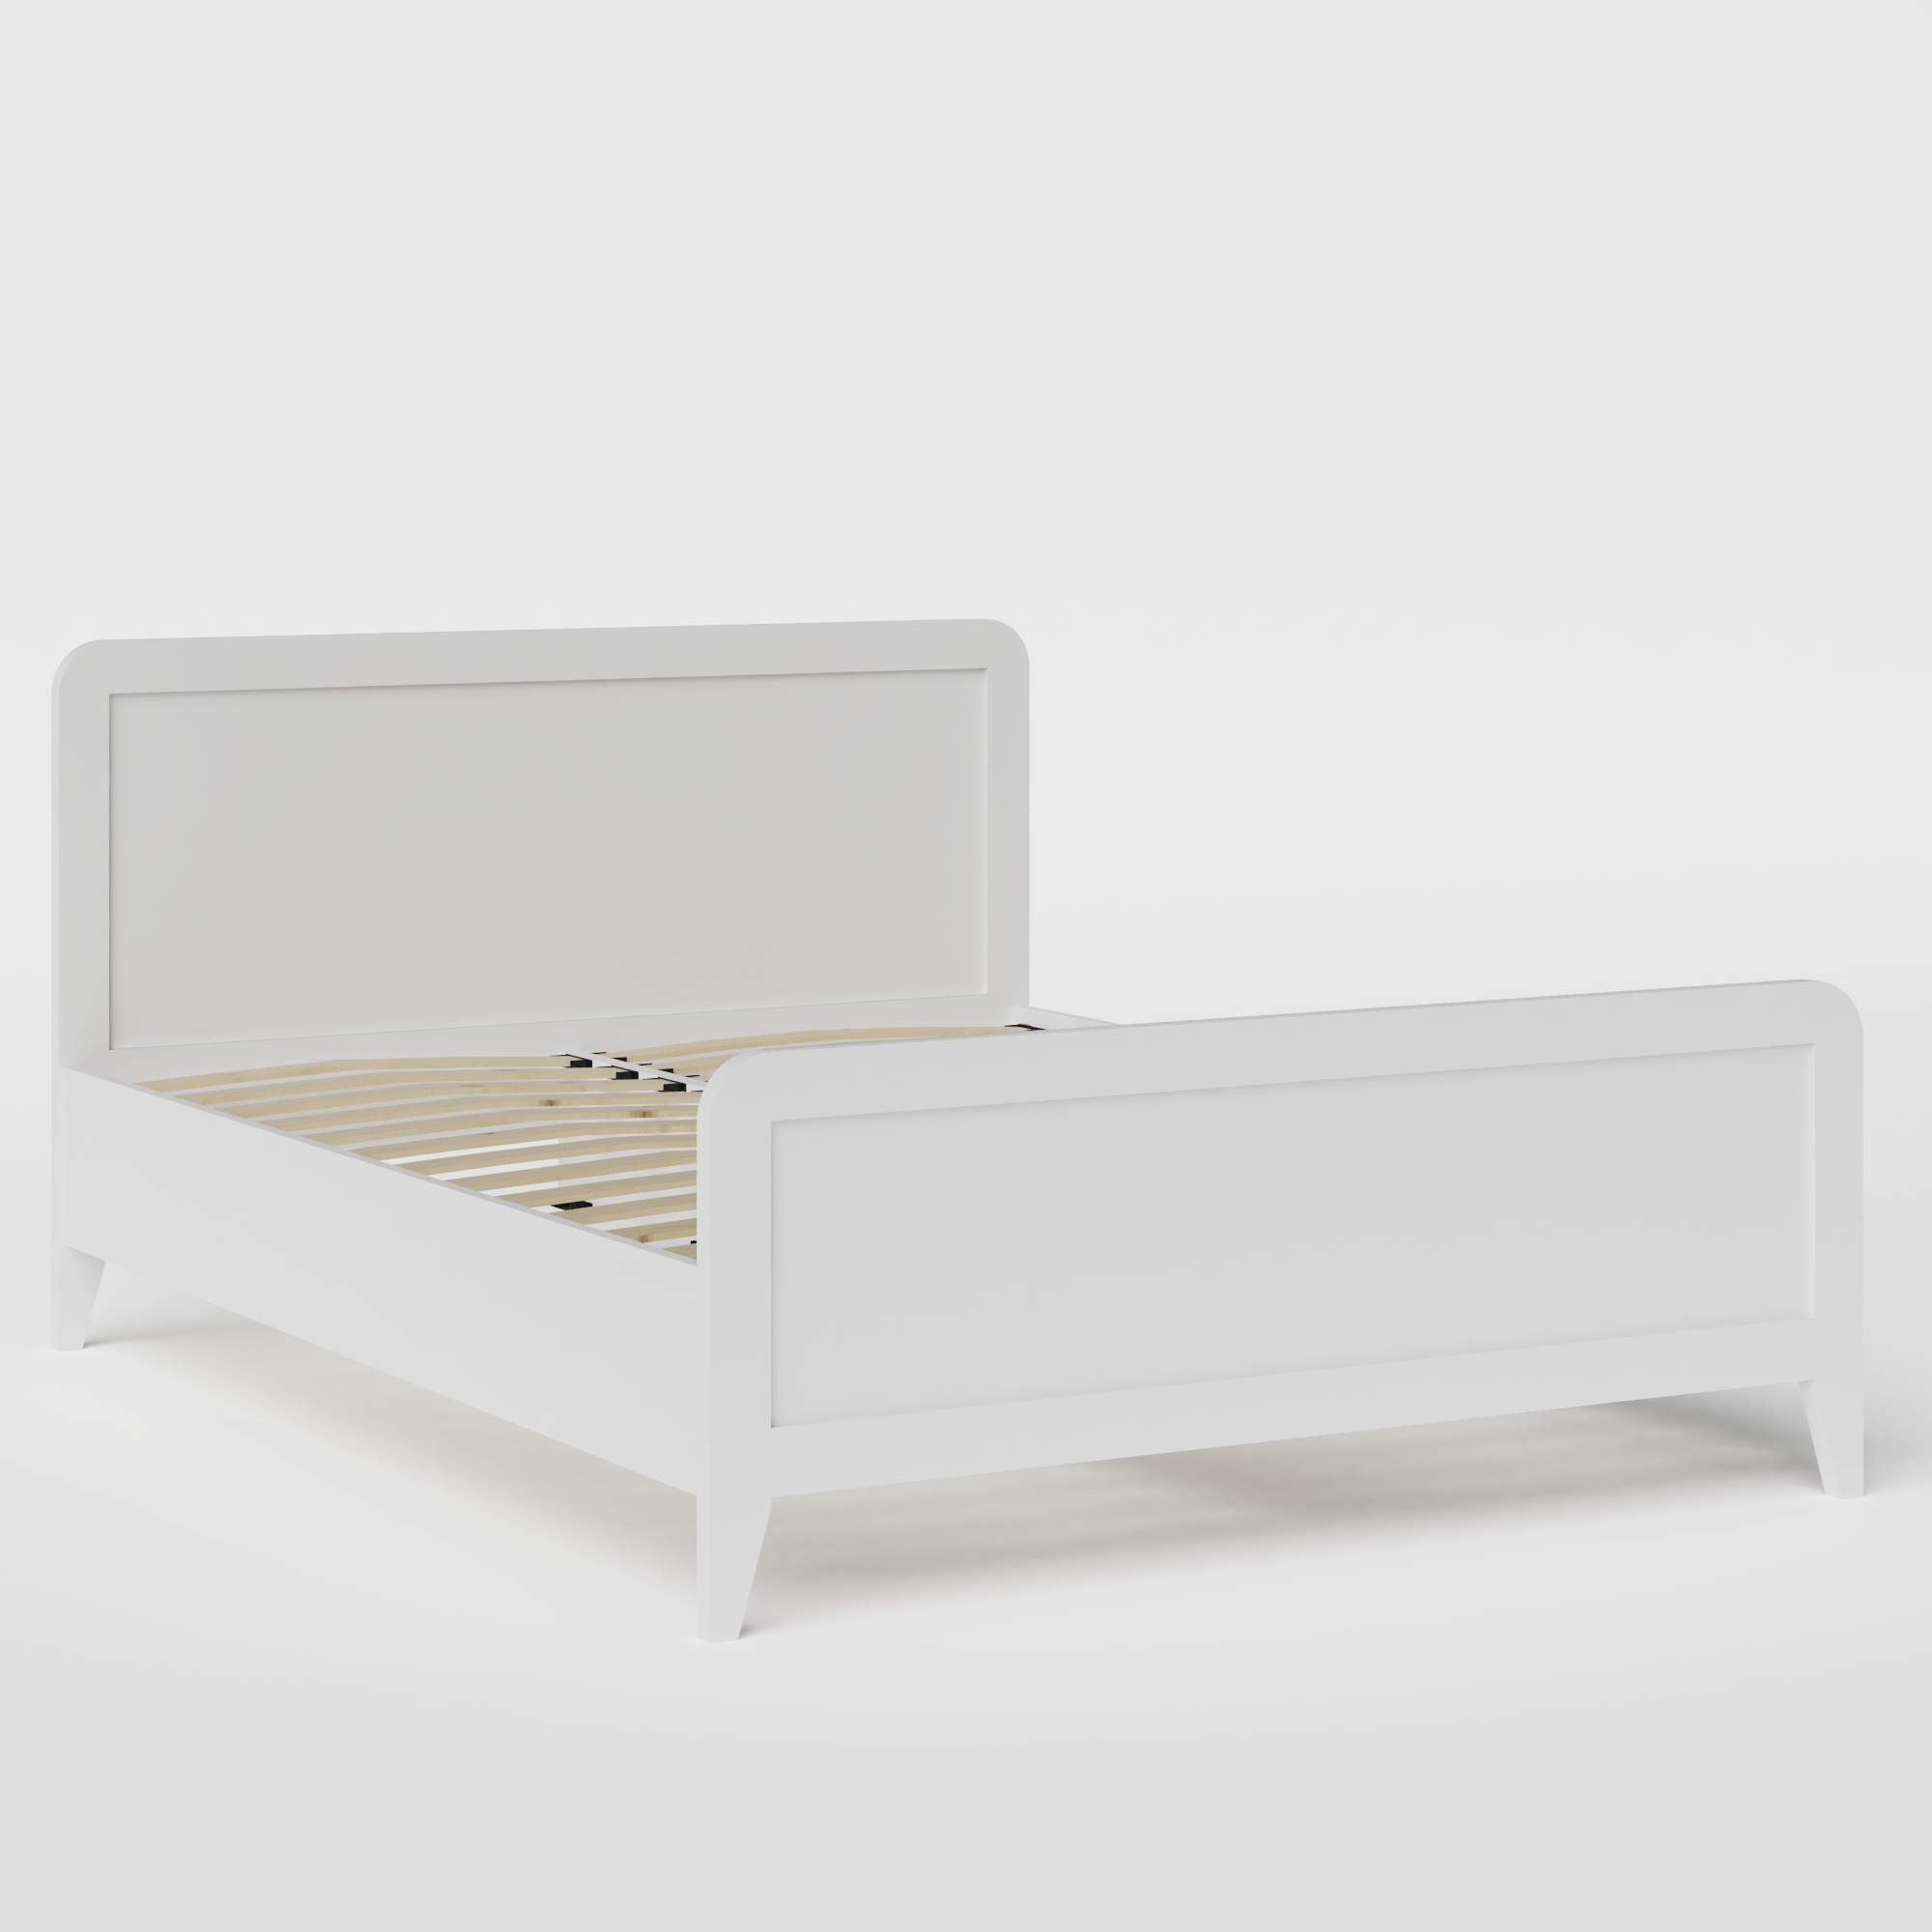 Keats Painted letto in legno bianco